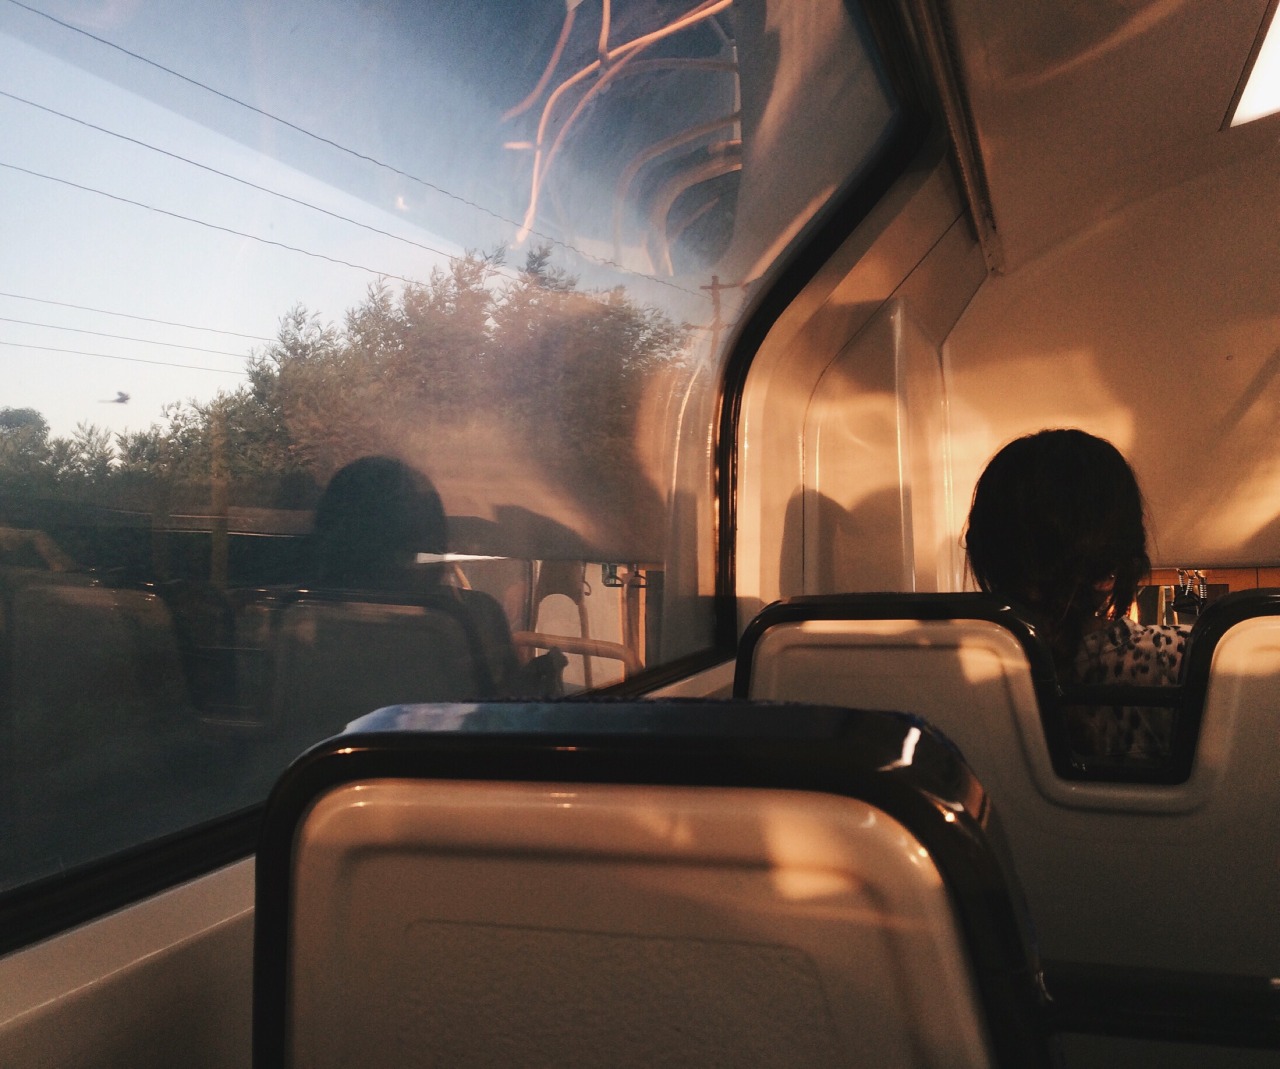 quirkhy:
“ Pretty sunlight on the train today
”